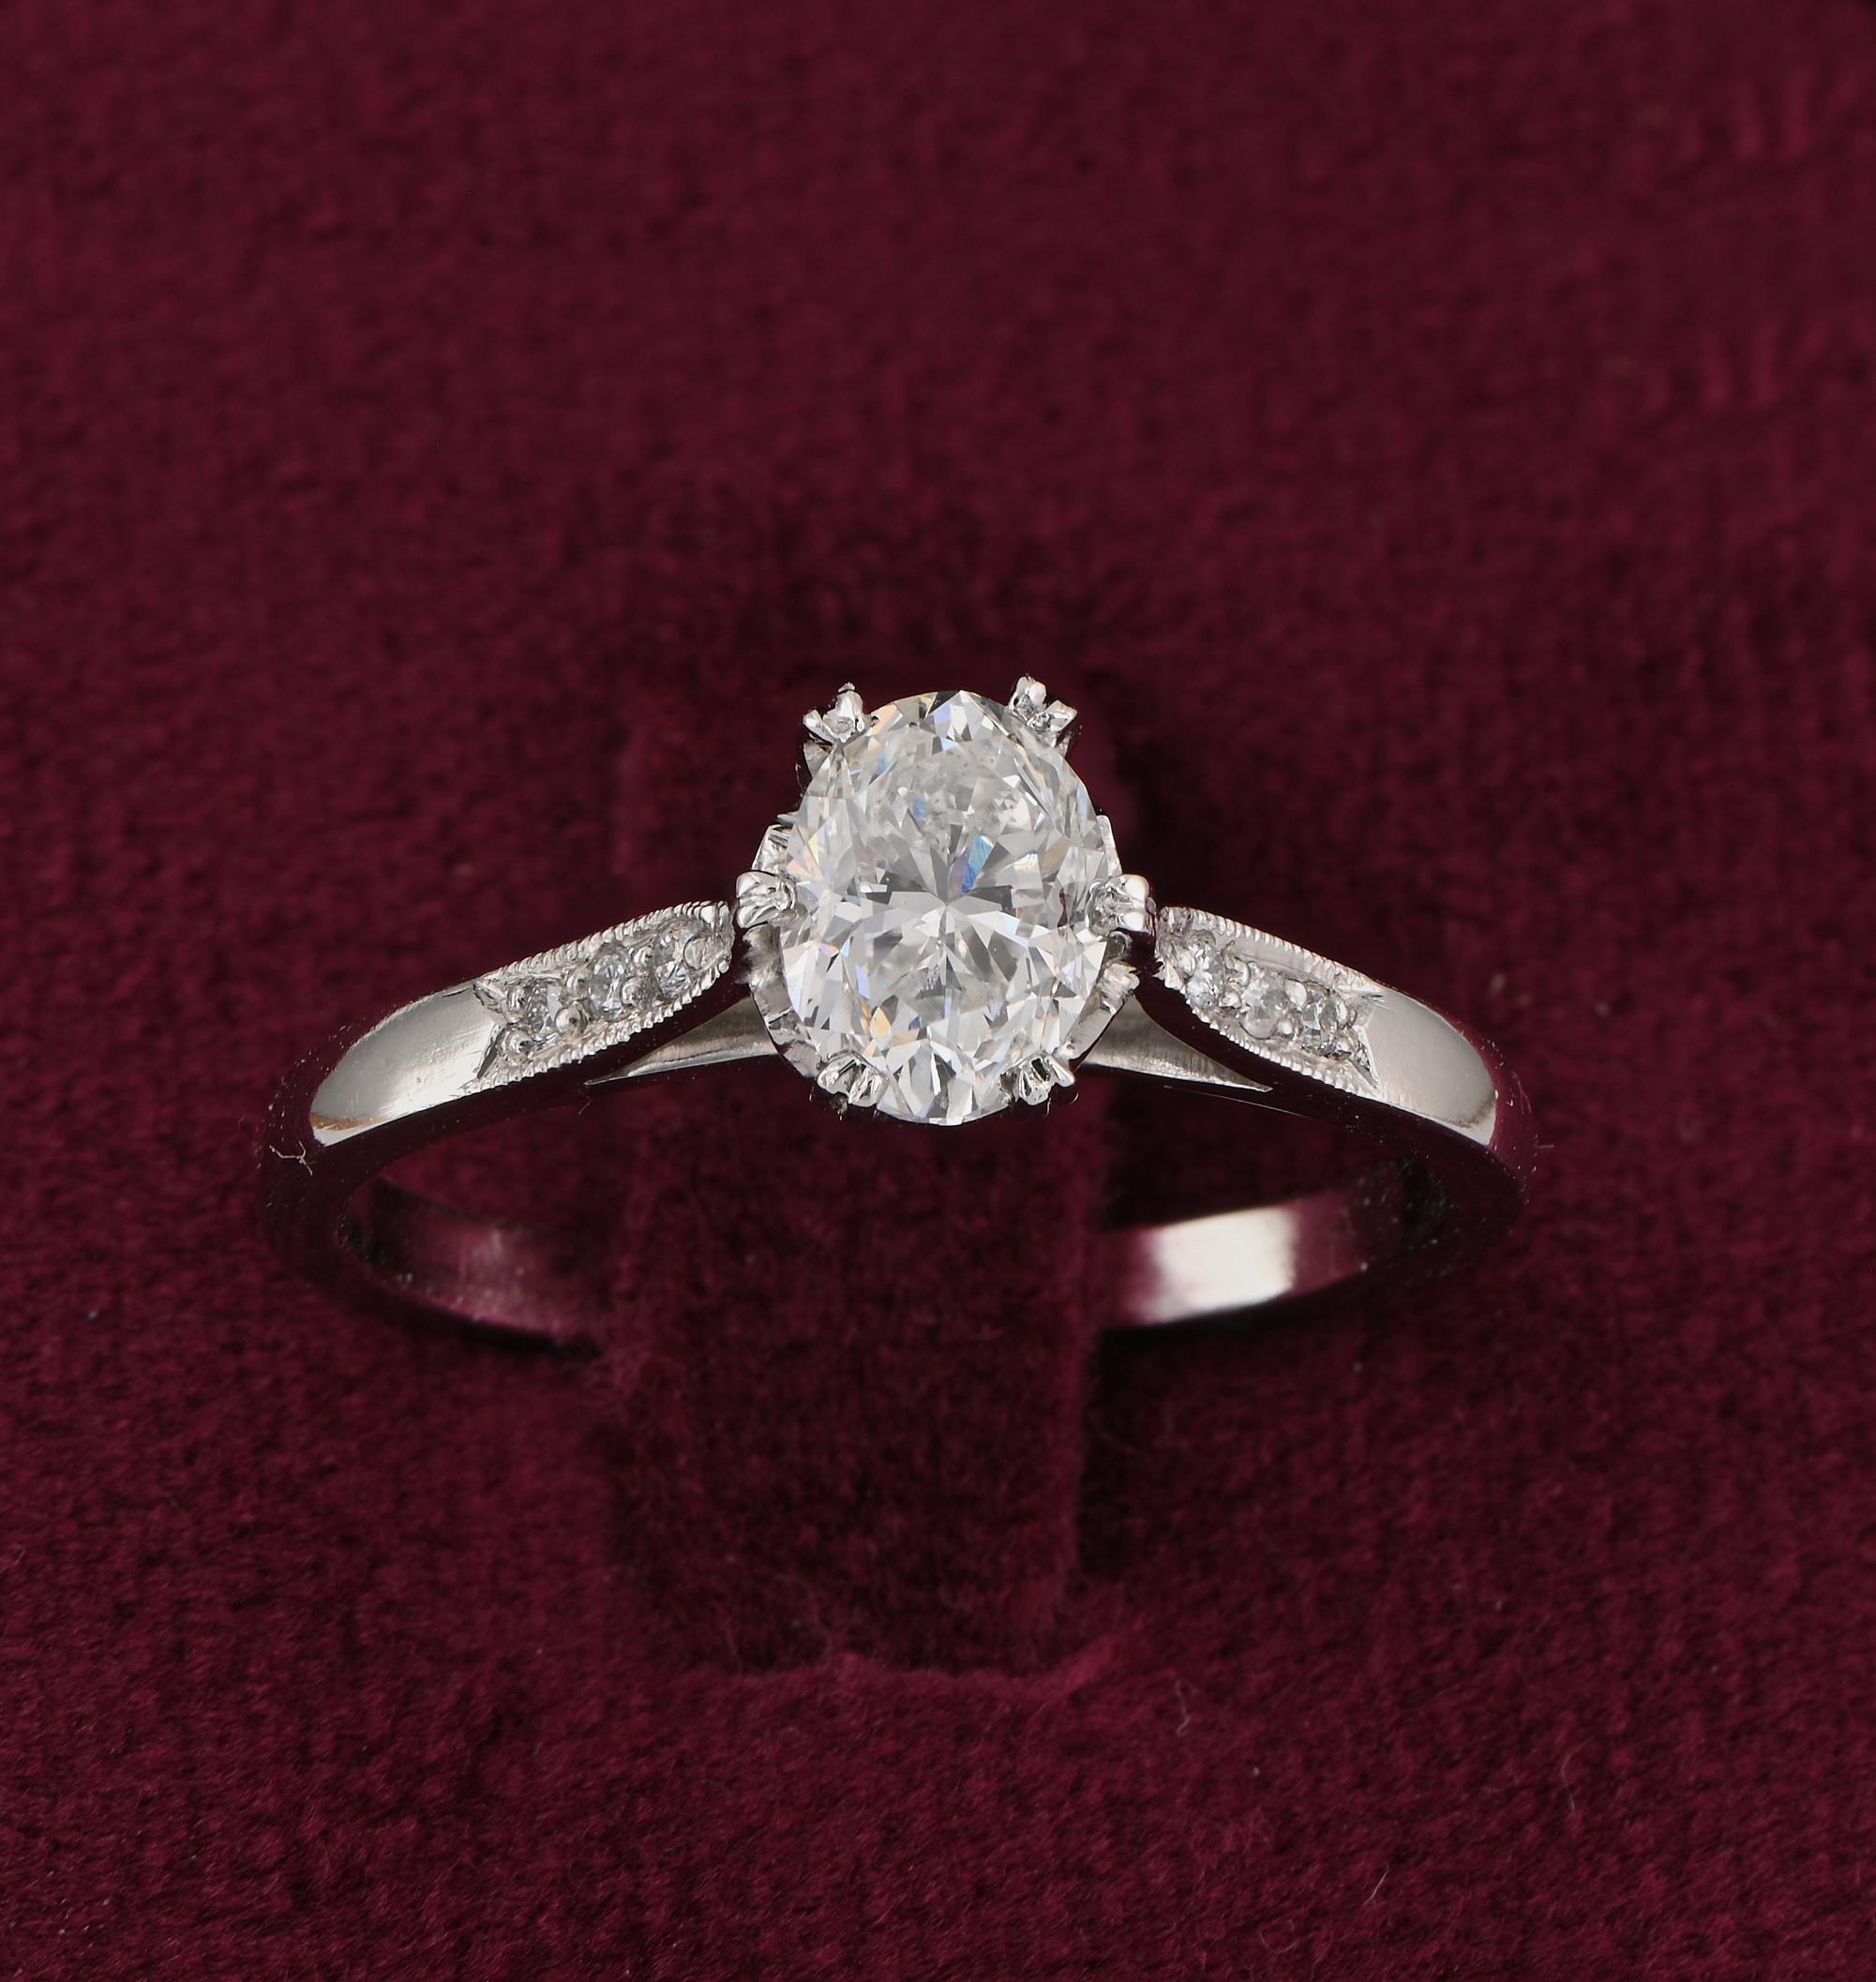 Diamond For Ever
This charming Art Deco Diamond solitaire ring is 1920 ca
Exquisitely hand crafted as unique of solid 18 KT gold topped by Platinum
Classy design in vogue at the time with a sleek elegant mount to display the center Diamond with